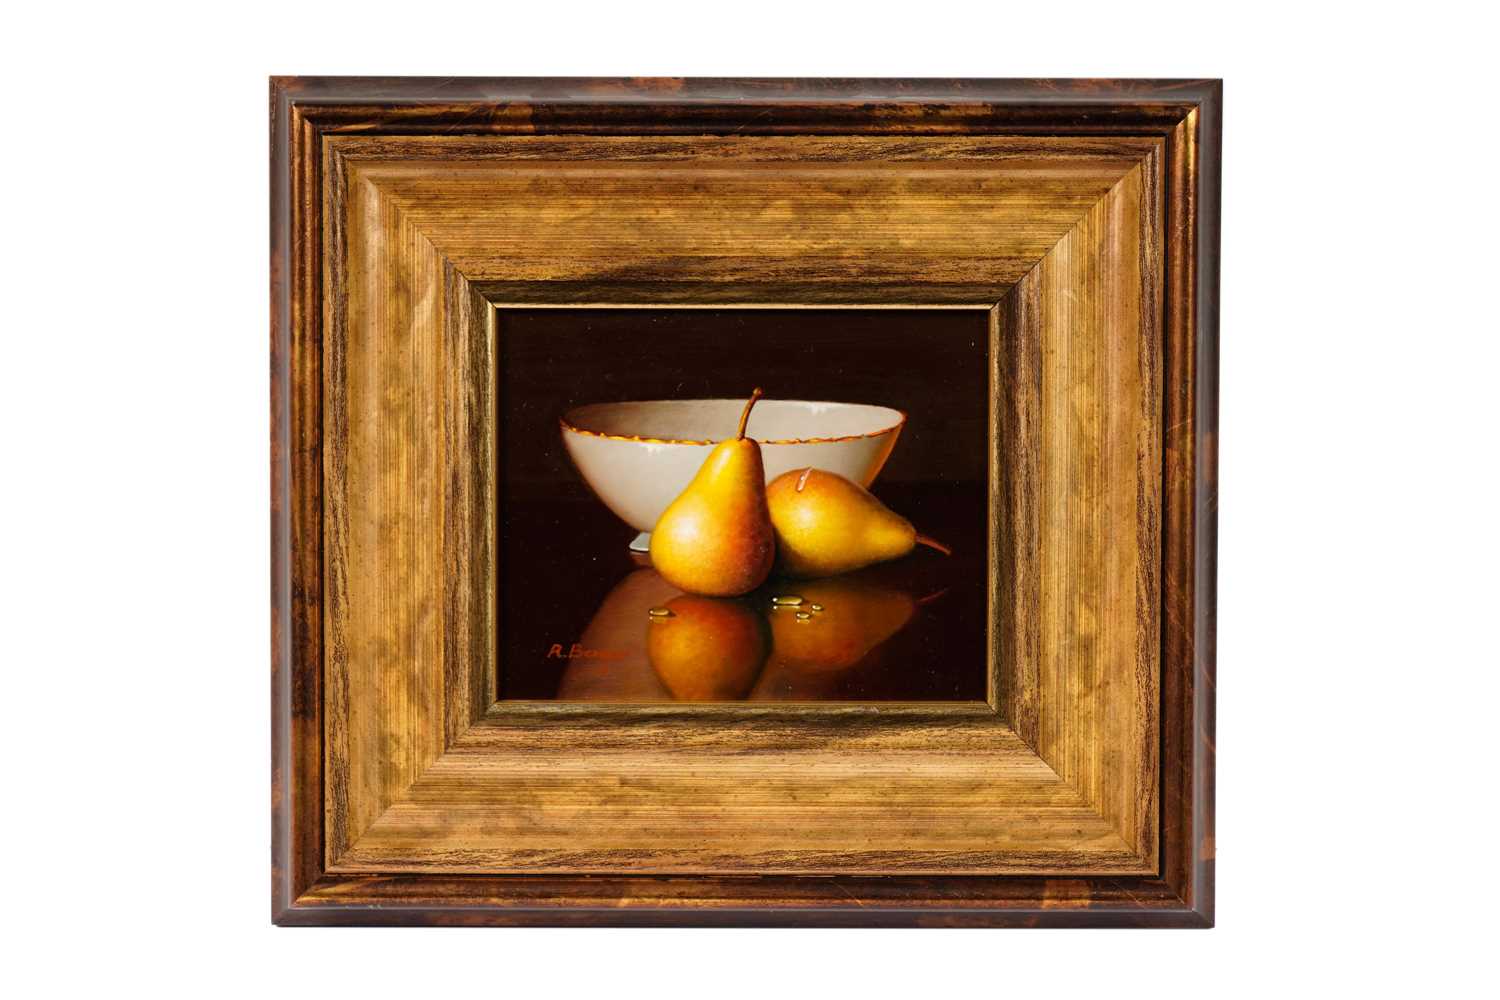 Ronald Berger - Porcelain and Pears | oil